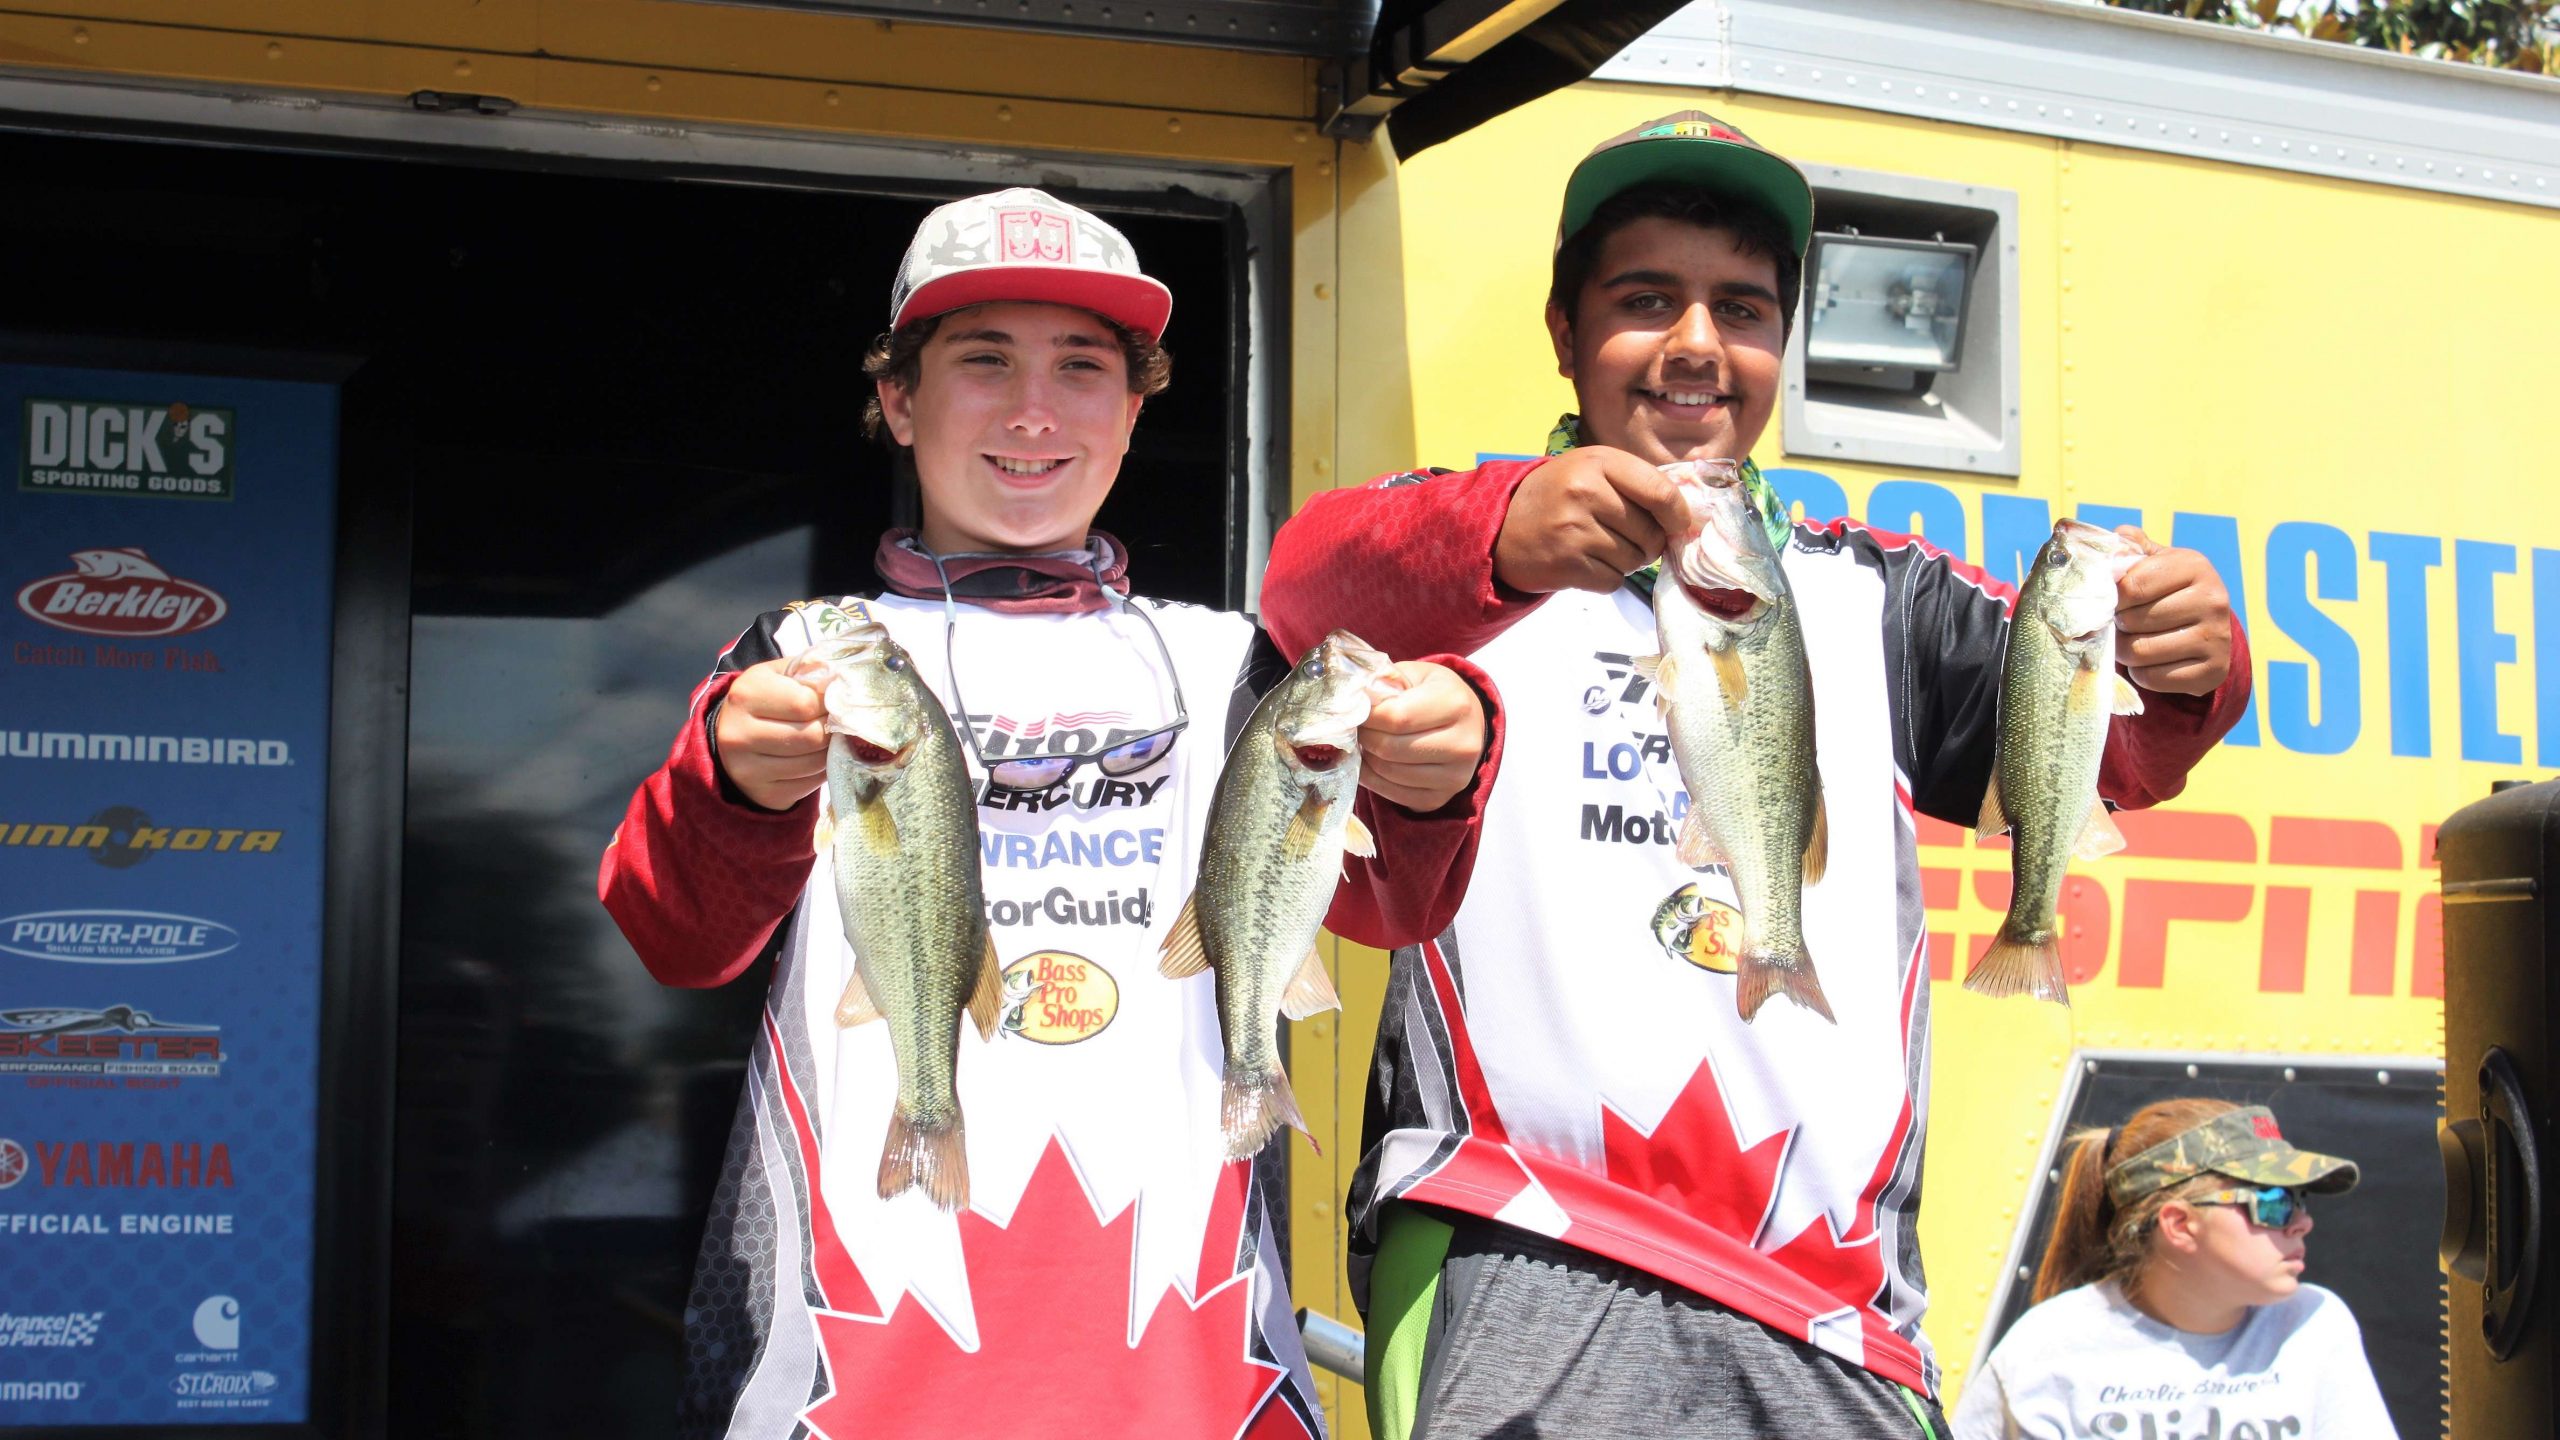  Tristan Huiser and Aaron Nijjar of Canada are in 31st place with 4-13.
